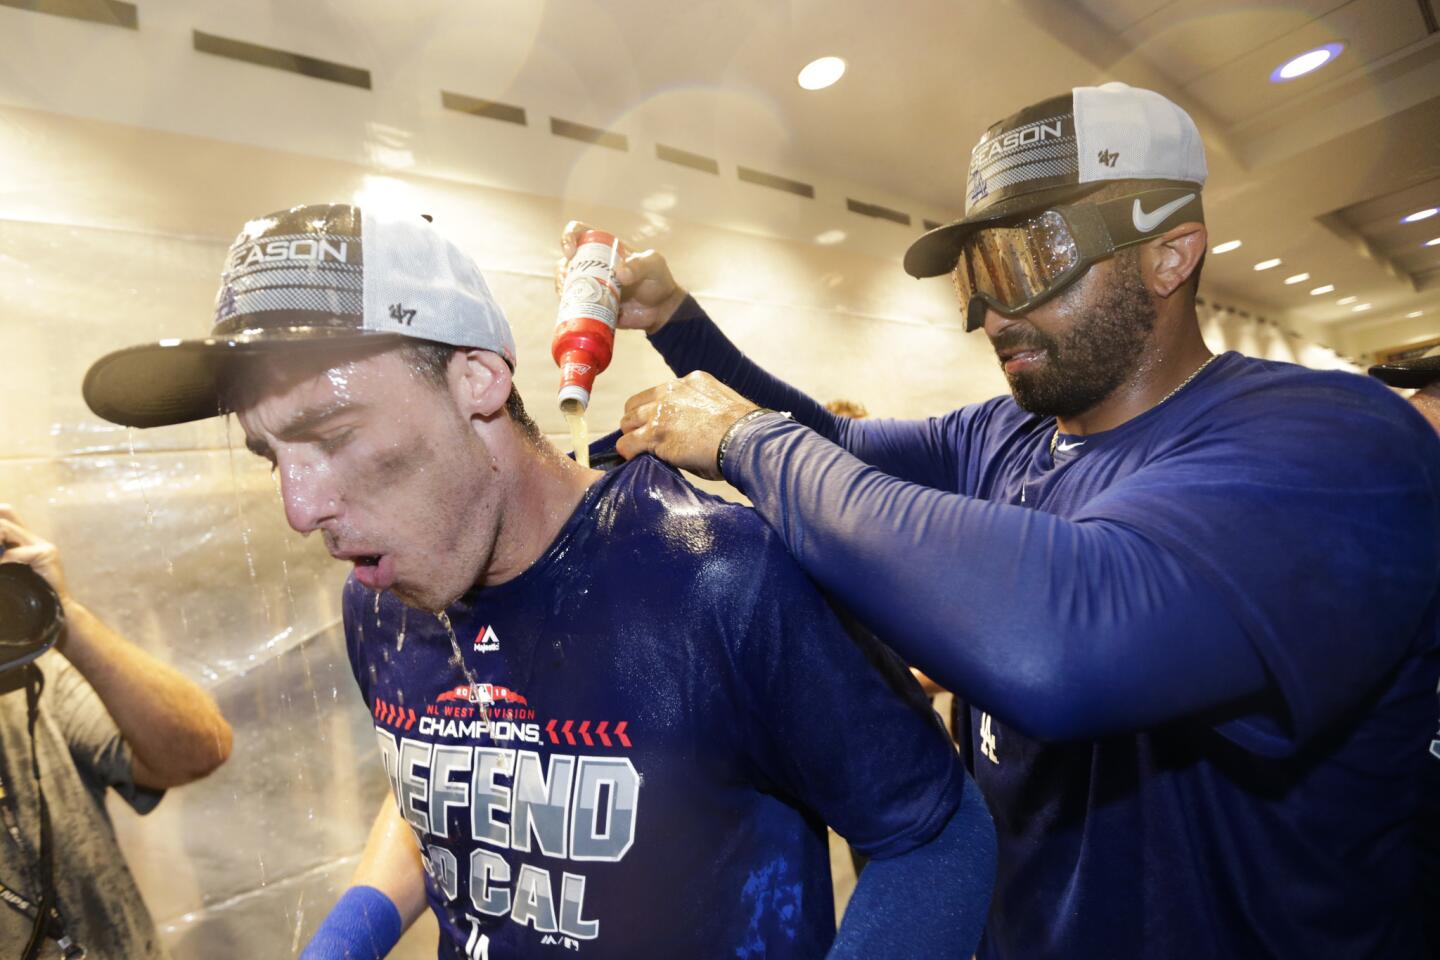 Los Angeles Dodgers' Matt Kemp, left, pours beer on Cody Bellinger while celebrating in the clubhouse after the team's 5-2 win against the Colorado Rockies in a tiebreaker baseball game, Monday, Oct. 1, 2018, in Los Angeles. (AP Photo/Jae C. Hong)